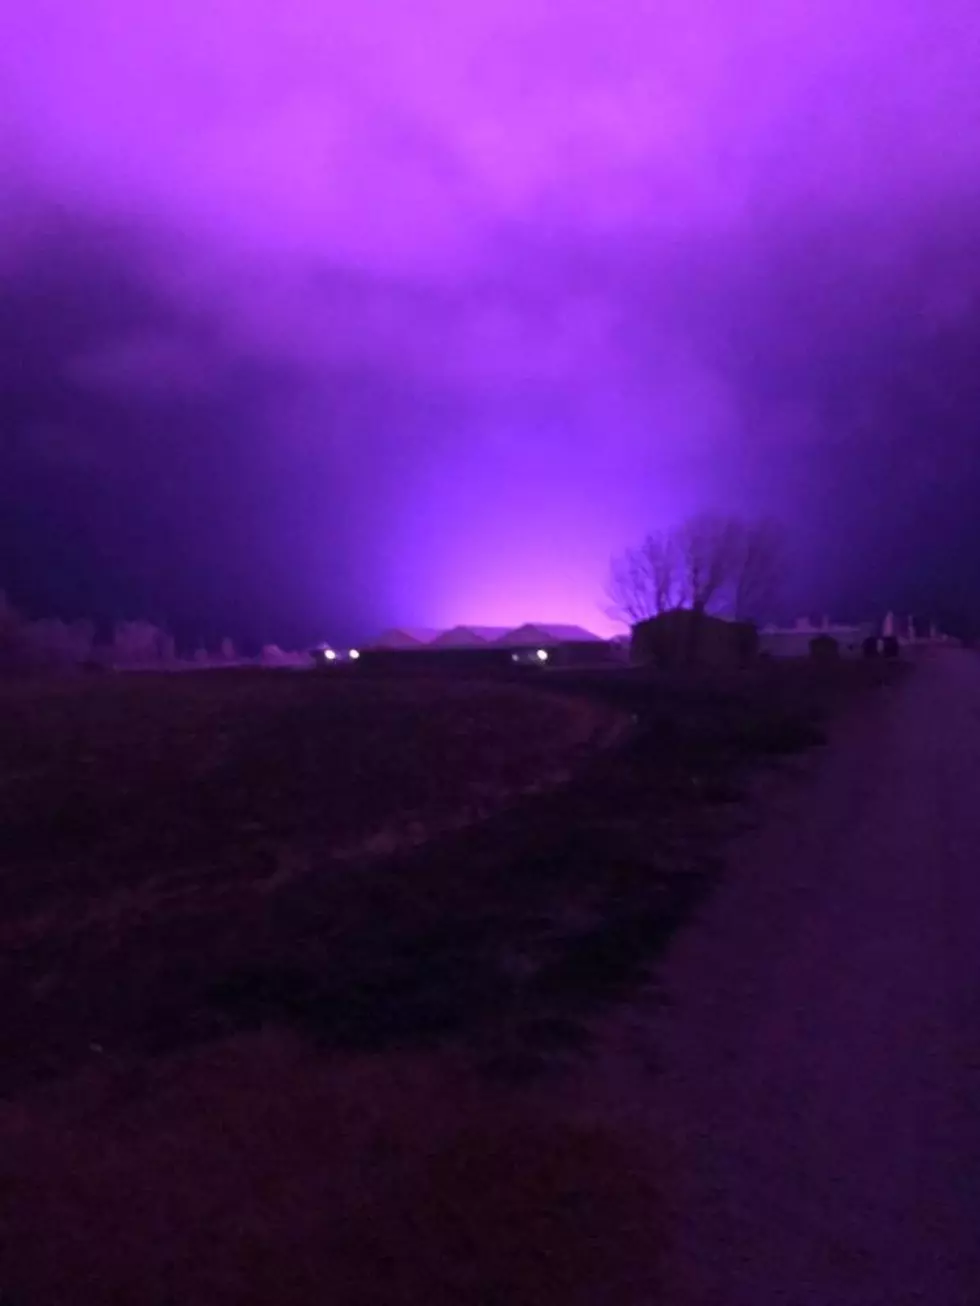 What Was The Purple Haze in the Finley Sky Overnight?